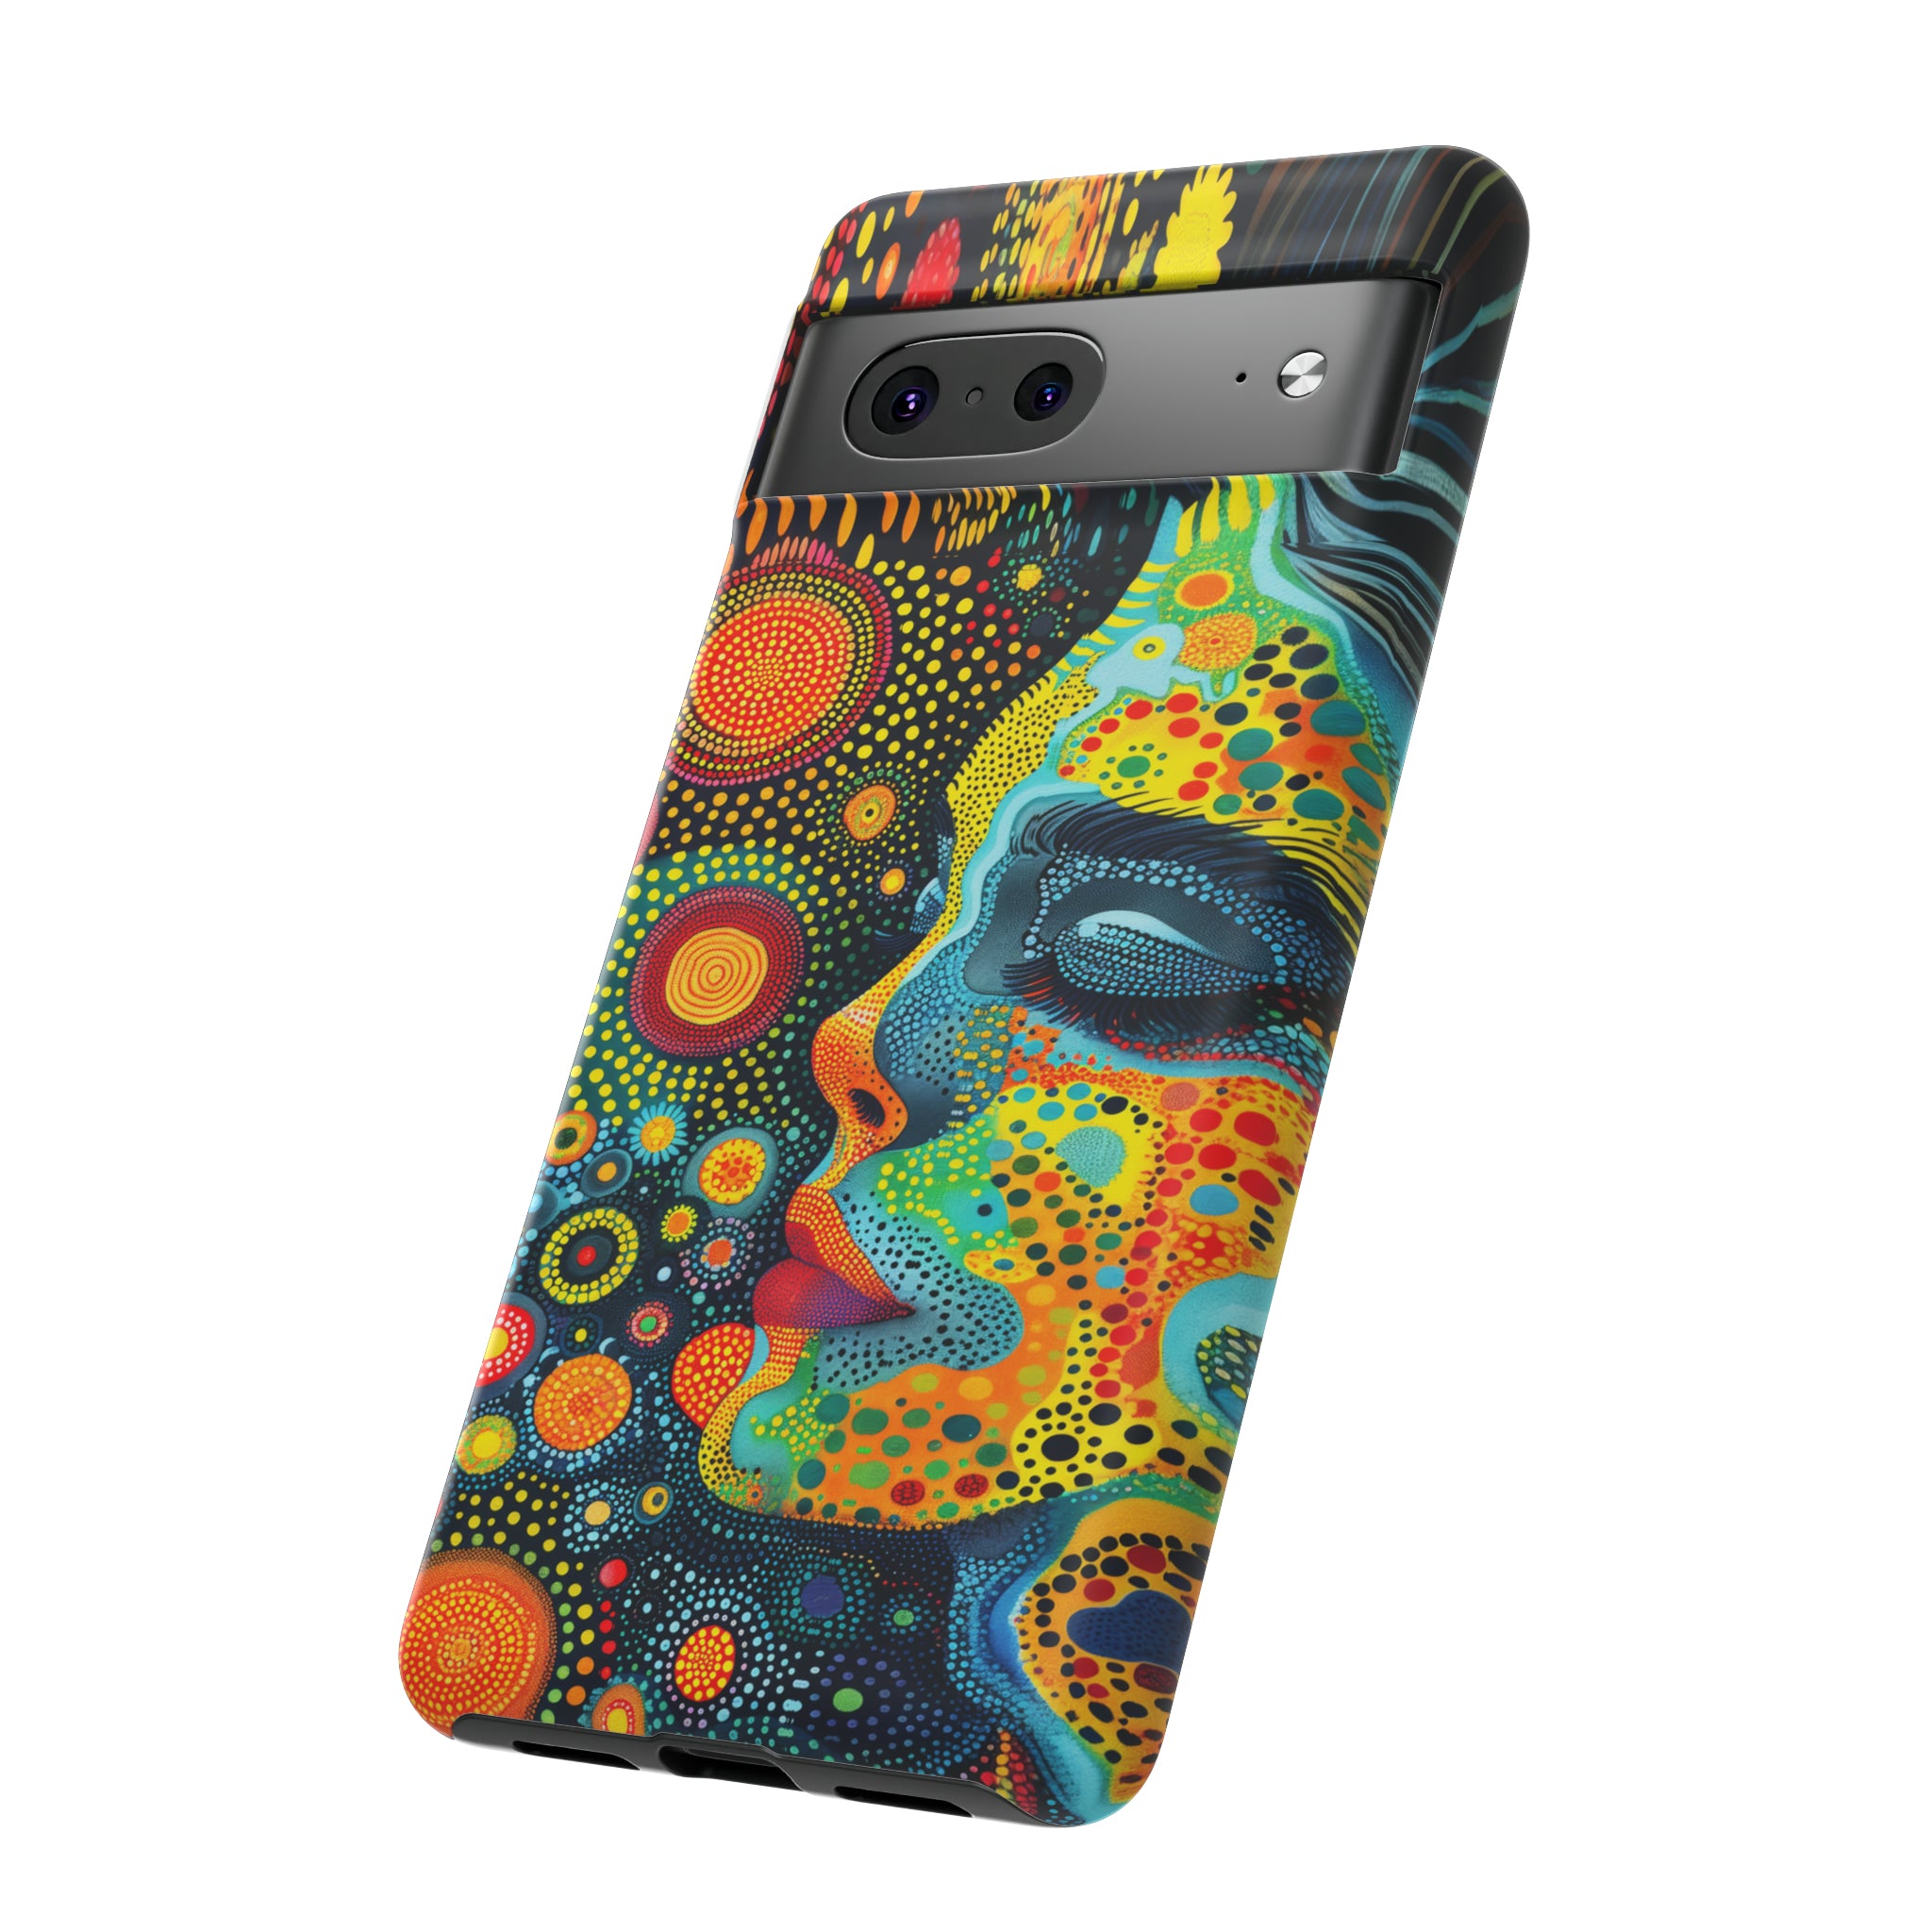 Phone Case, whimsical colorful design, Artistic design, Tough Case, Colorful whimsical fantasy design, iPhone 15, 14, 13, 12, 11, Samsung, Pixel